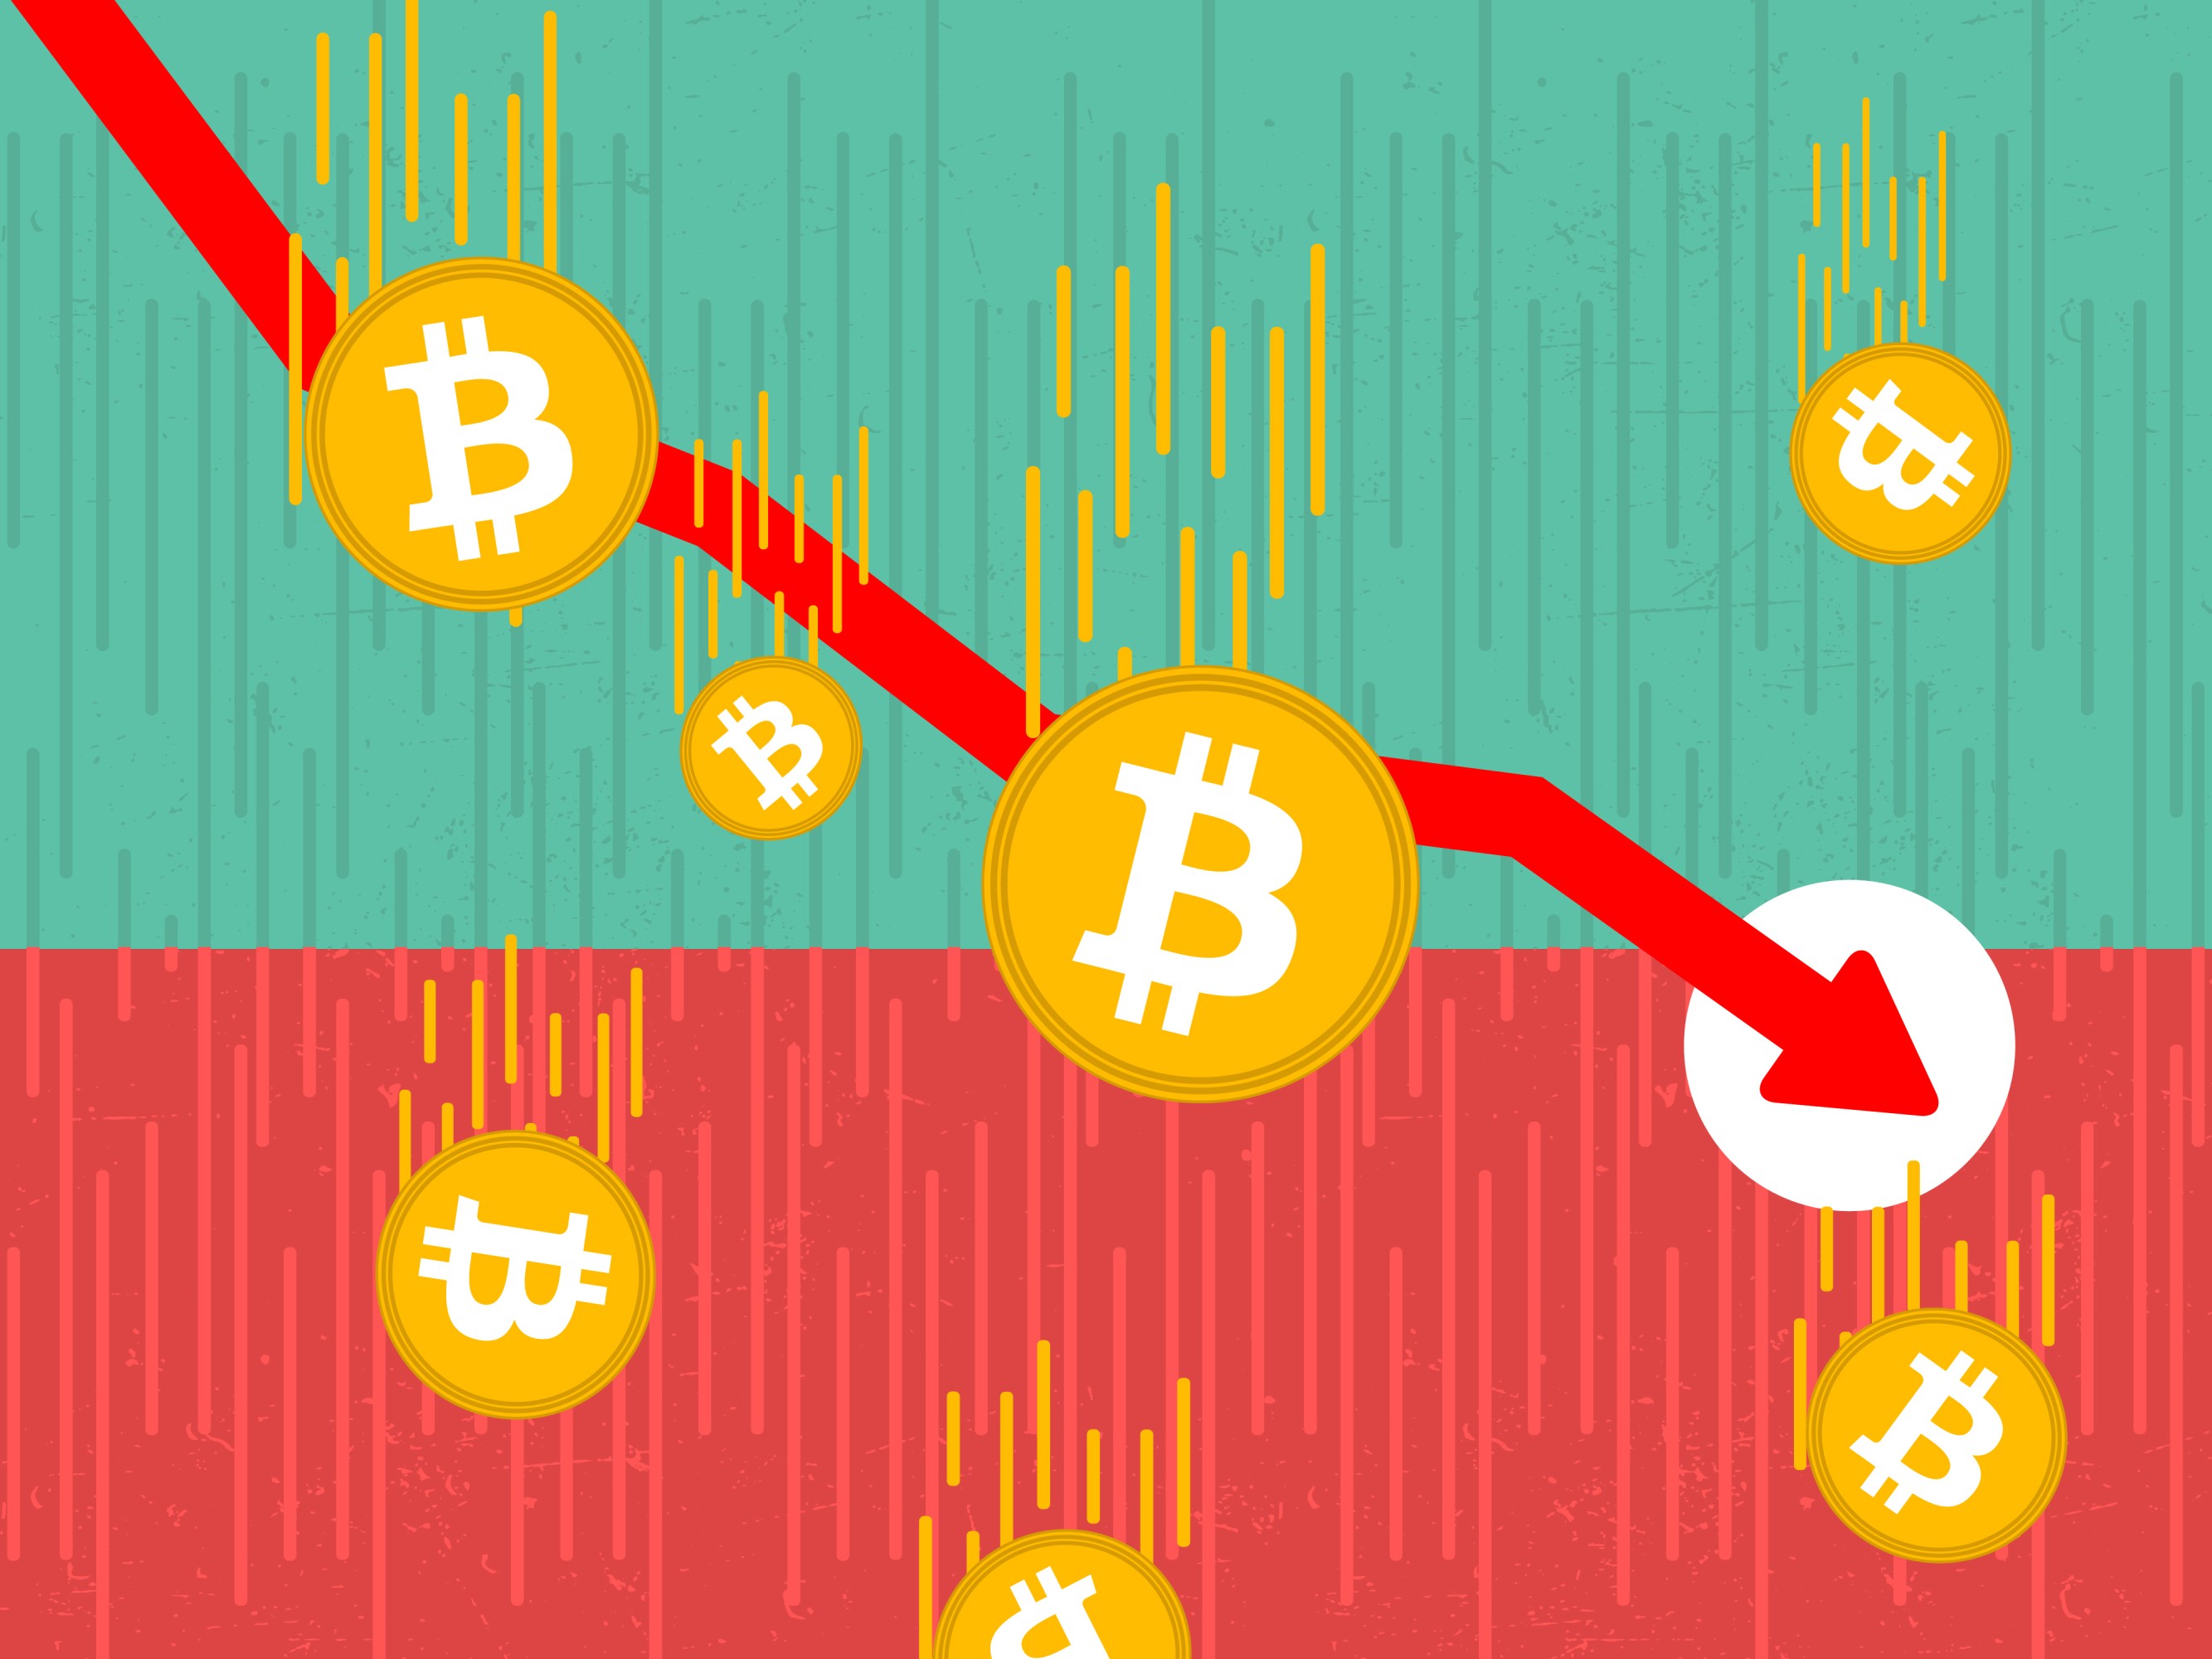 Why Bitcoin is falling even as ETFs see billions in new investment – DL News